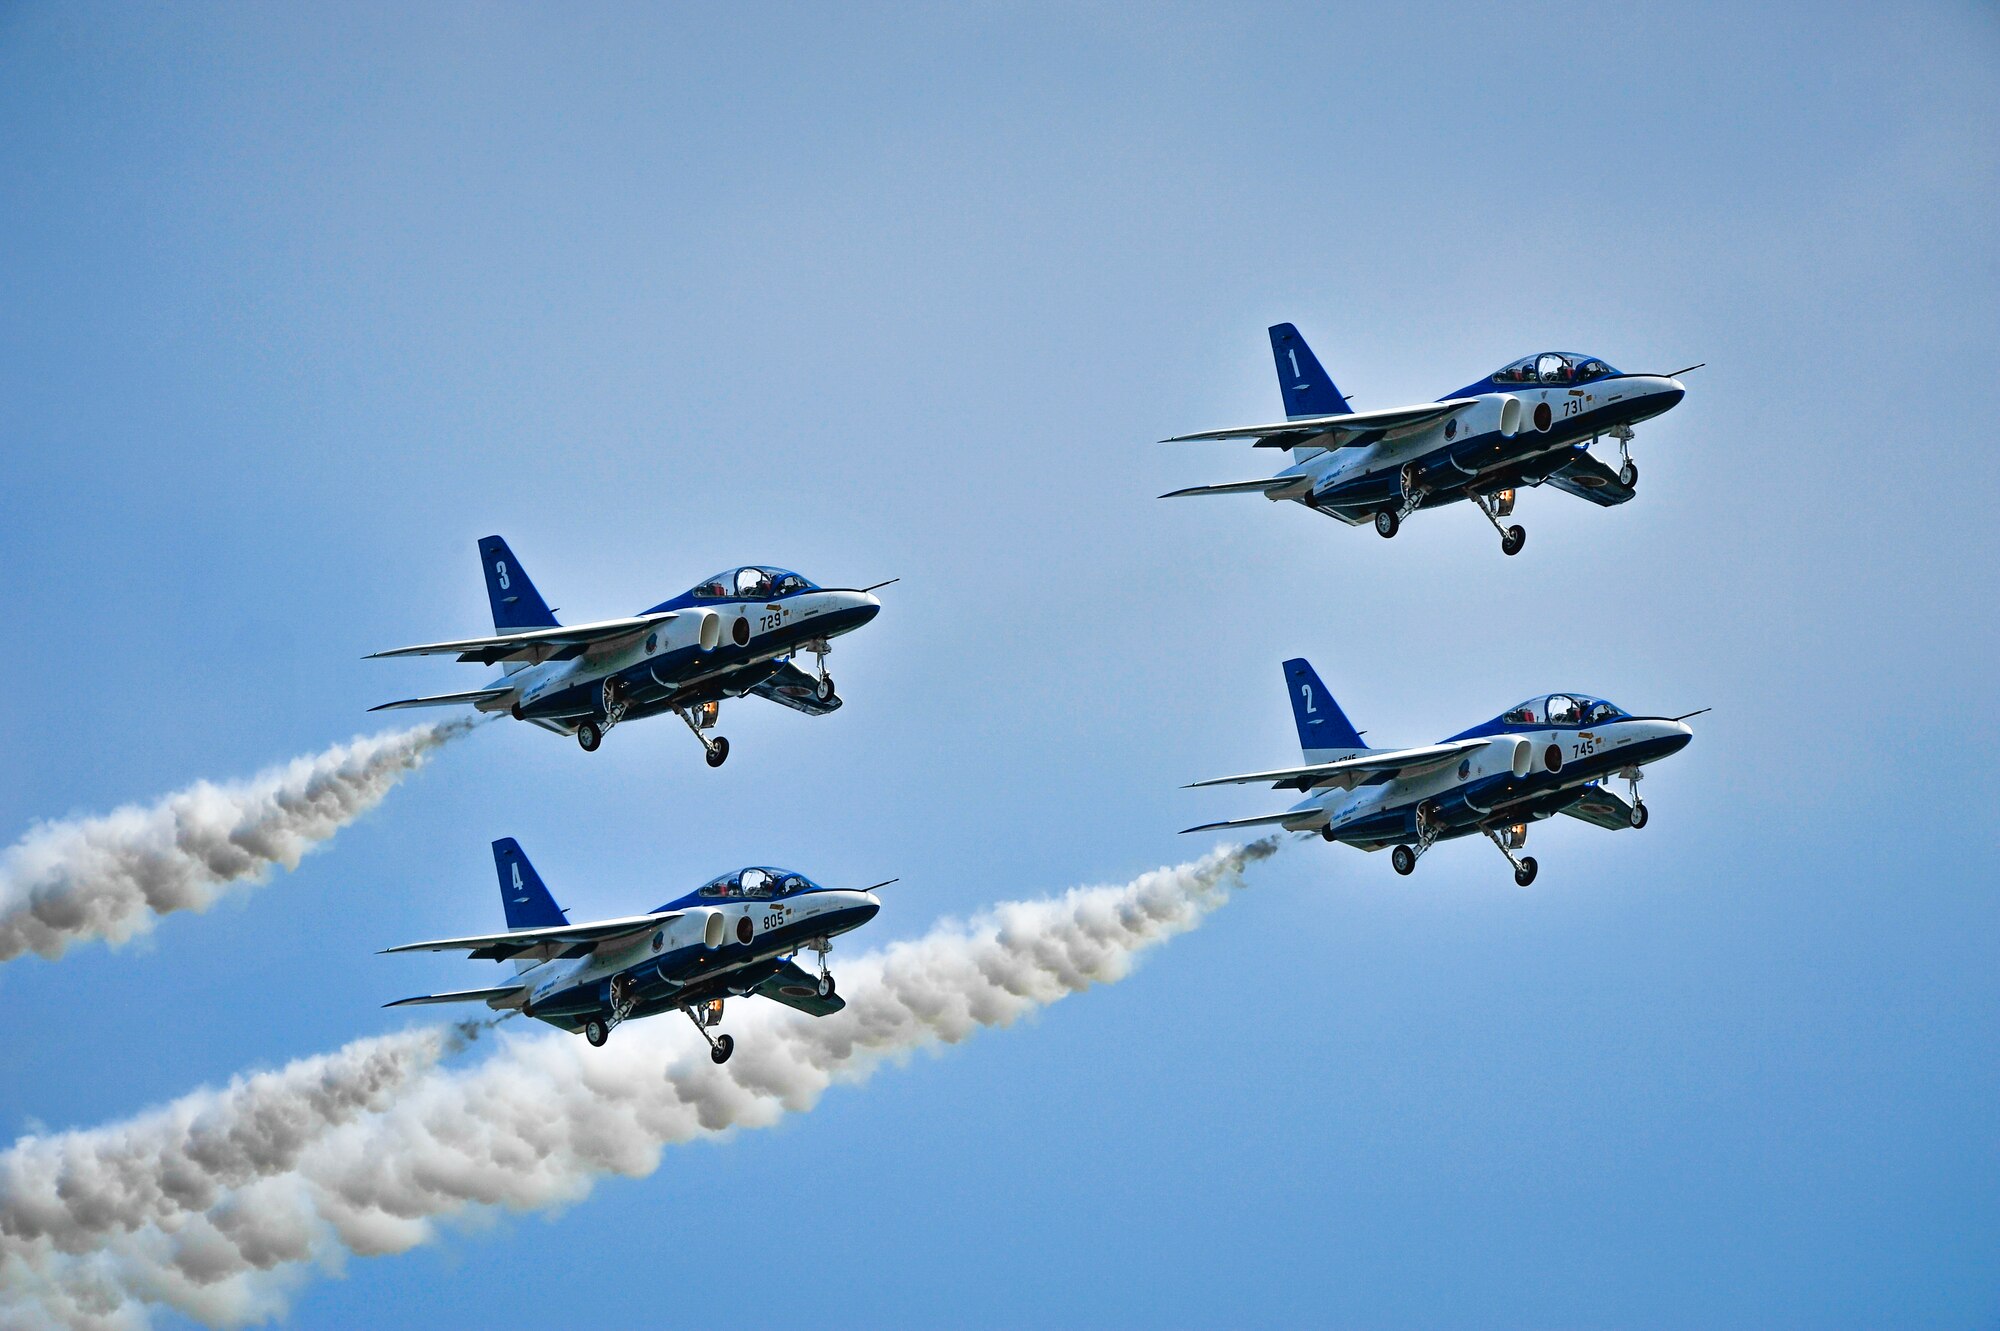 The Japan Air Self-Defense Force's demonstration team, Blue Impulse, flies over Misawa Air Base, Japan, Sept. 14, 2013. The team visited the area in conjunction with the annual air festival, which thousands of visitors attend to photograph and learn about military aircraft. (U.S. Air Force photo by Staff Sgt. Nathan Lipscomb)